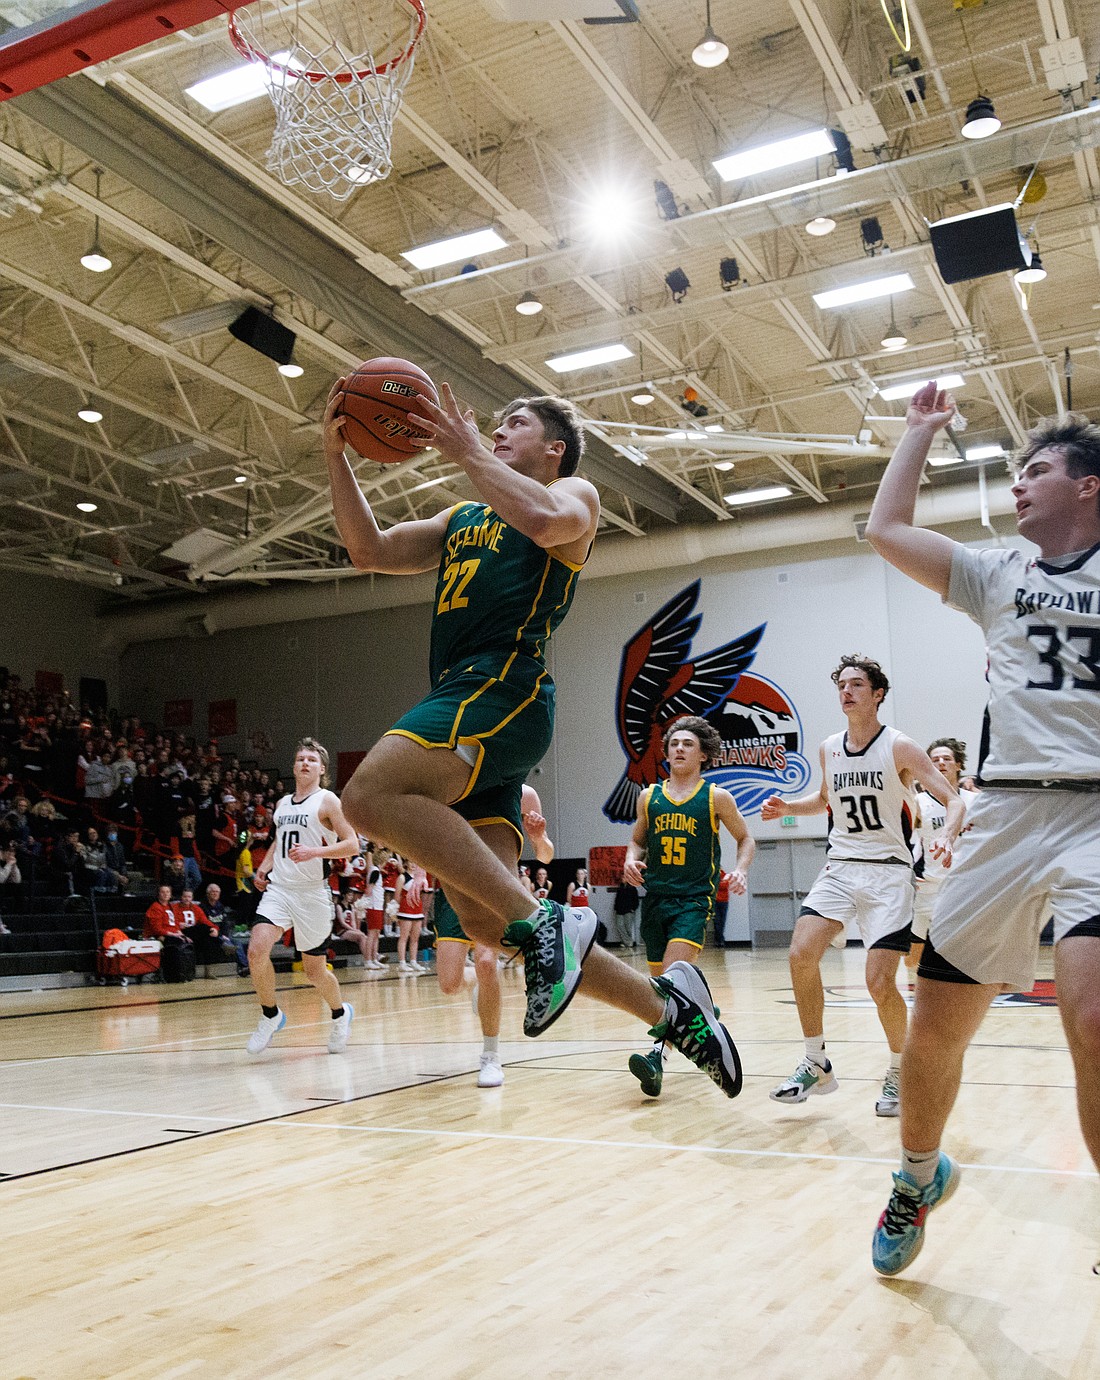 Sehome's Tommy Funk makes a sprinting leap to the basket in the fourth quarter against Bellingham on Dec. 19.